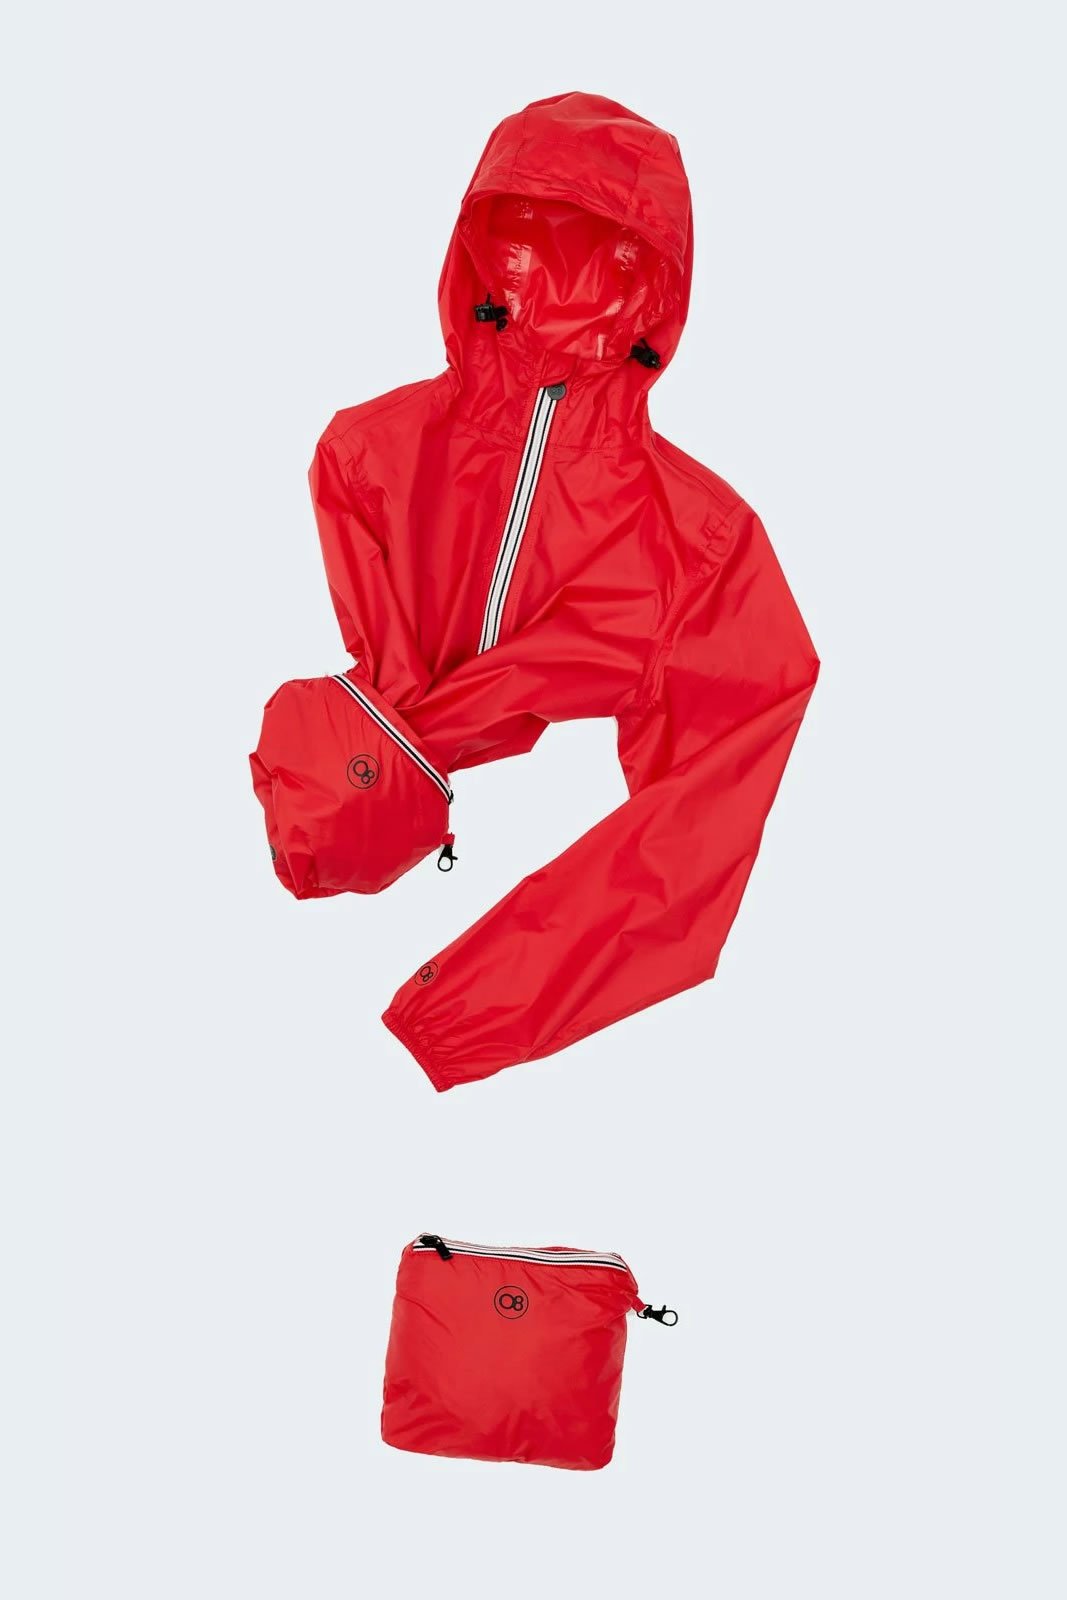 Picture of a Men's Full Zip Navy Blue Waterproof Rain Jacket in red to depict how it is packed into a bag